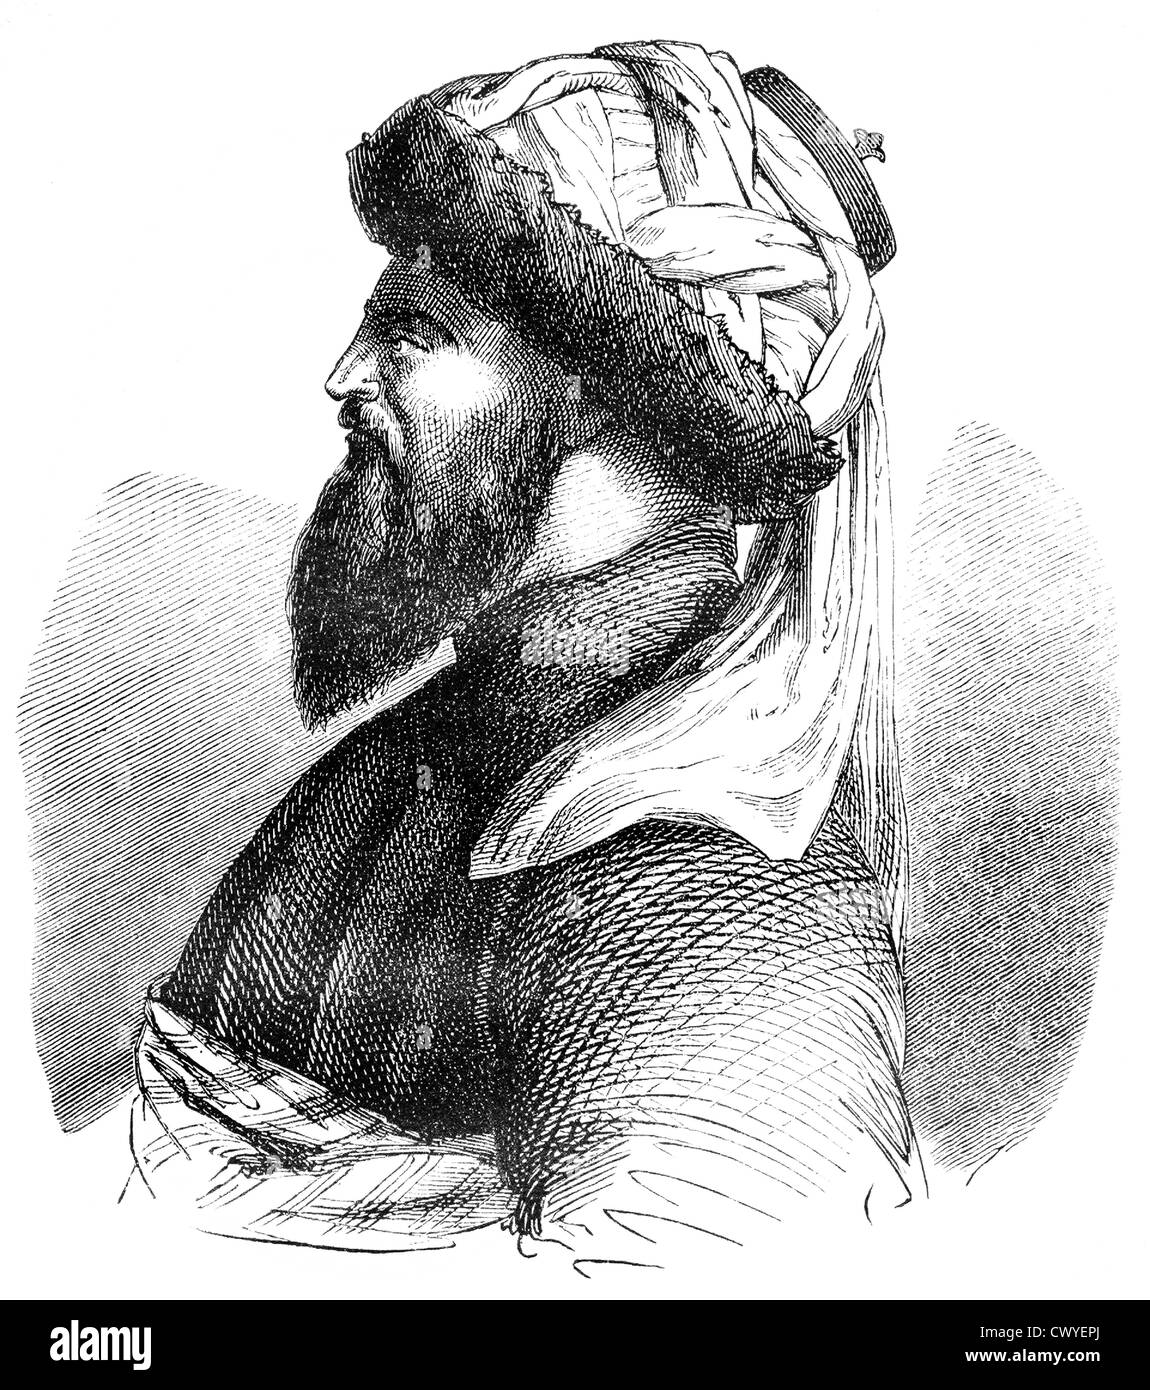 Imam Shamil, 1797 - 1871, a political and religious leader of the Muslim mountain peoples in the Caucasus and Chechnya Dagestan Stock Photo